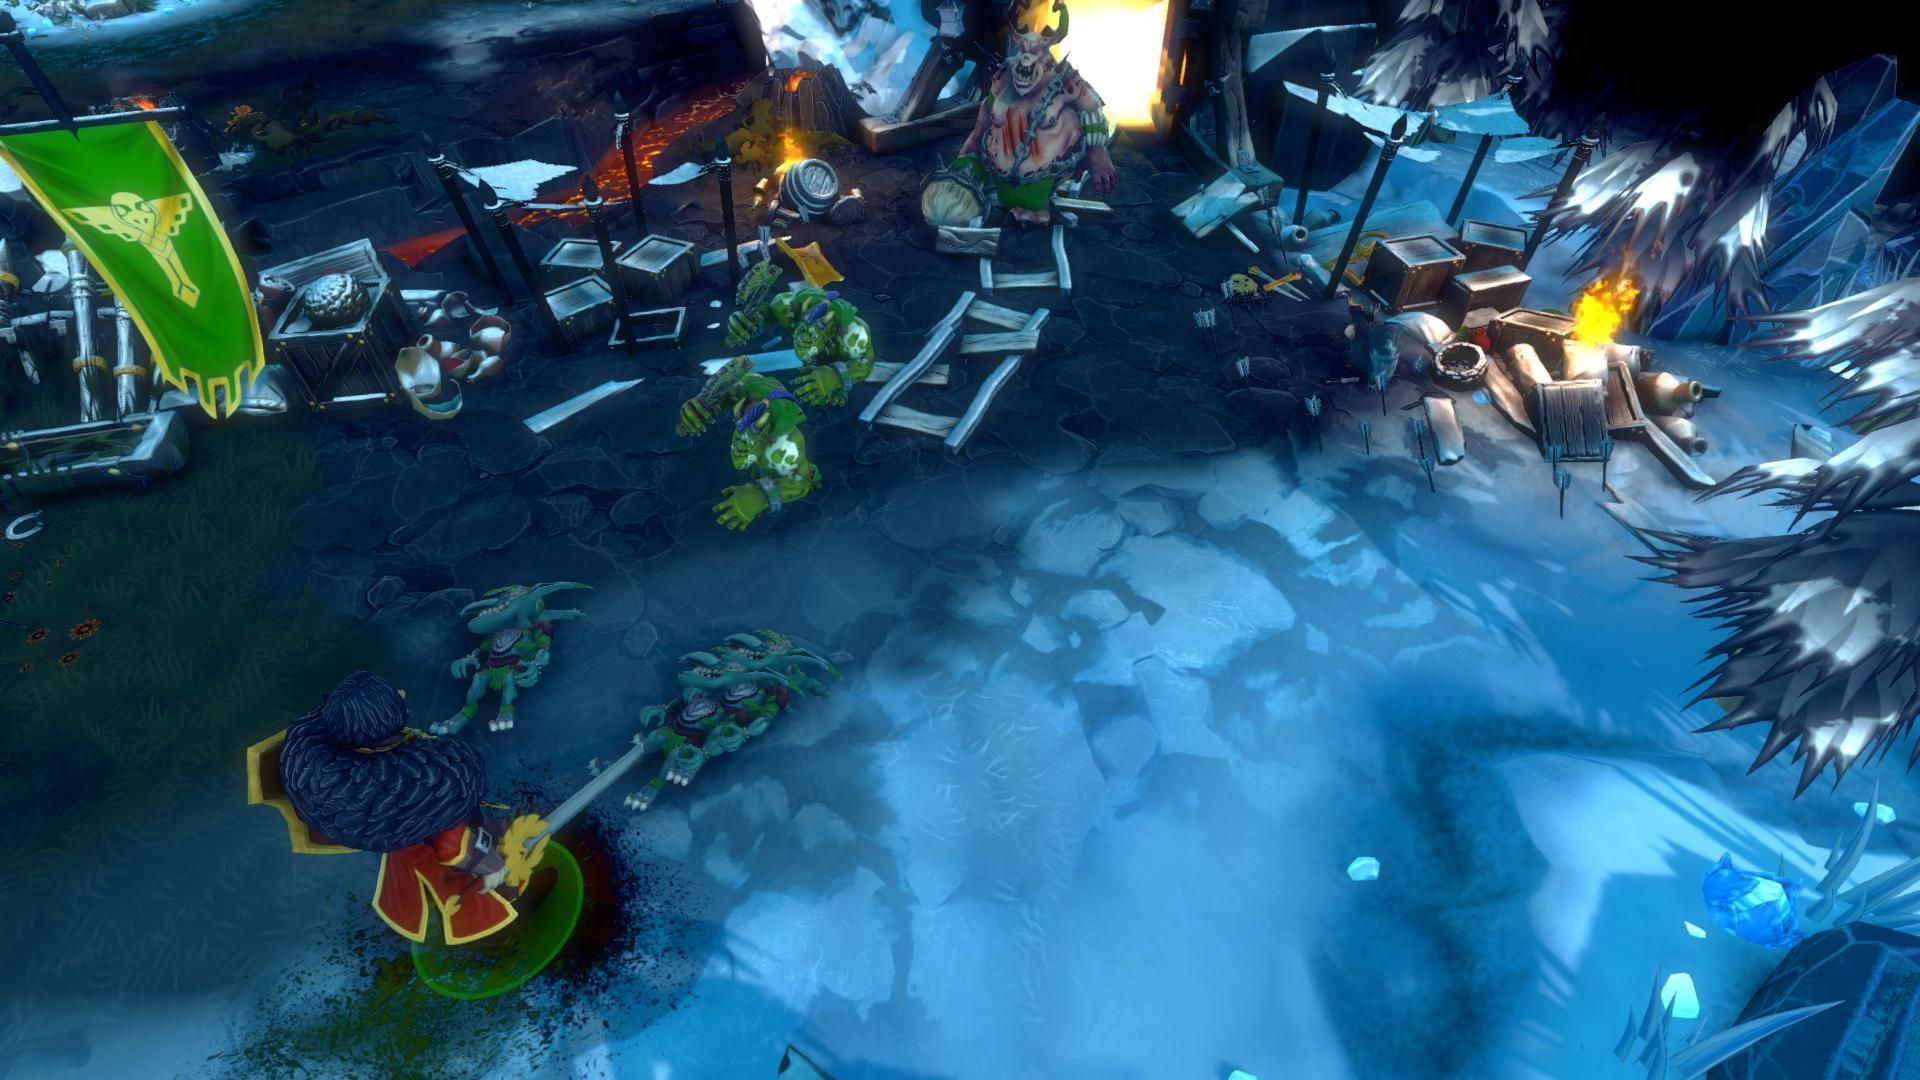 Dungeons 2 - A Game of Winter Featured Screenshot #1